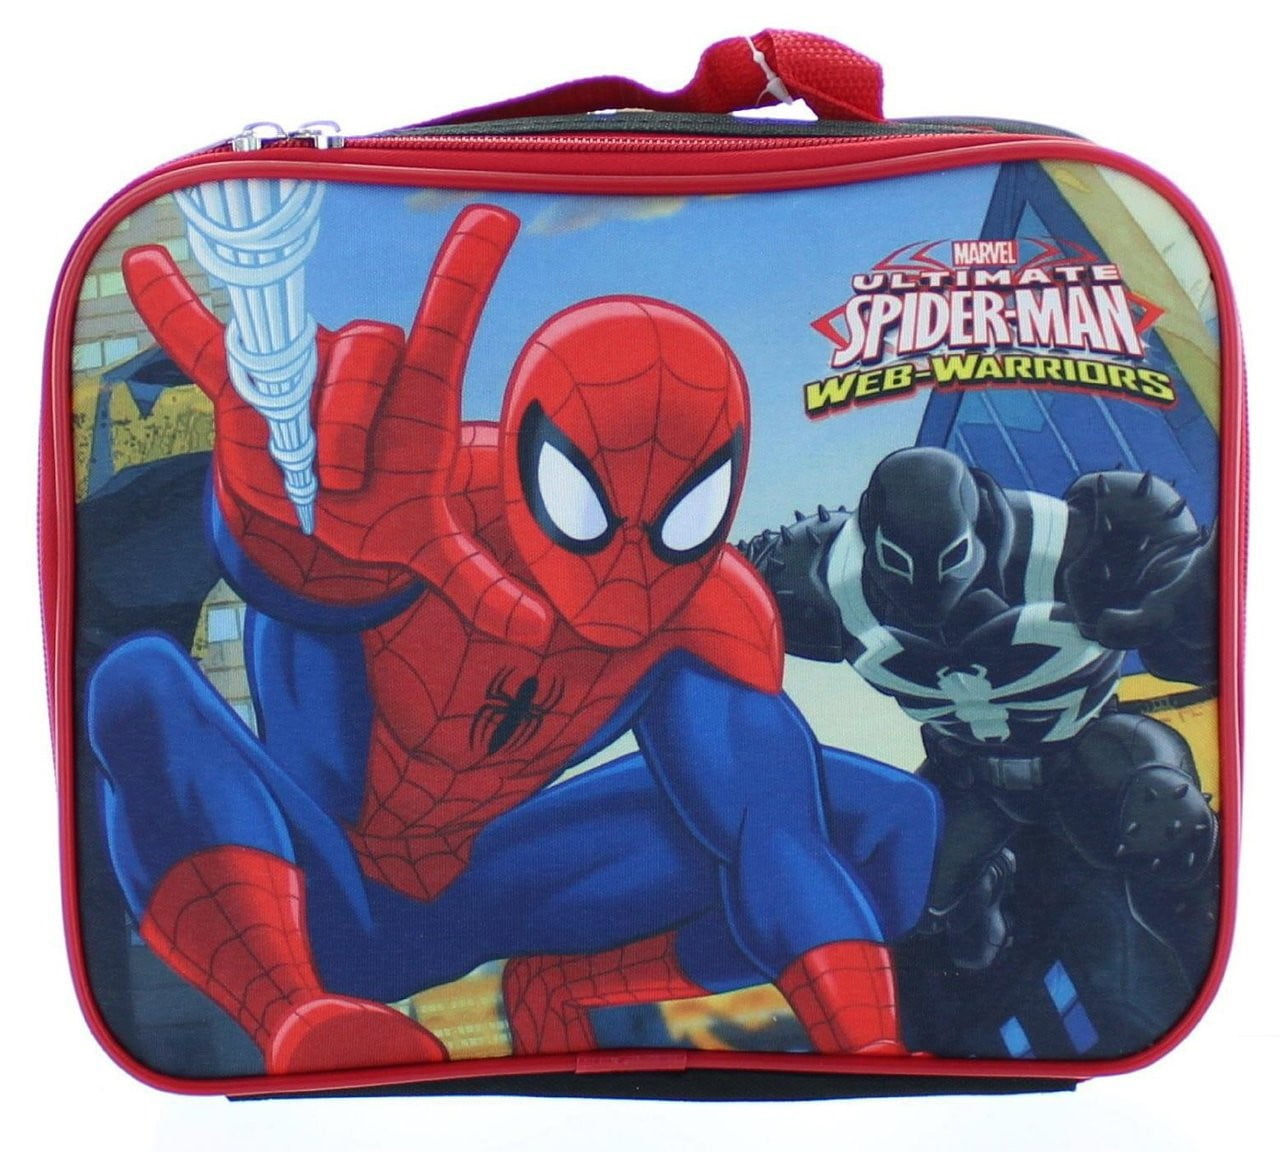 MARVEL ULTIMATE SPIDER-MAN MOLDED CHEST 6-PACK LUNCH TOTE INSULATED NWT 